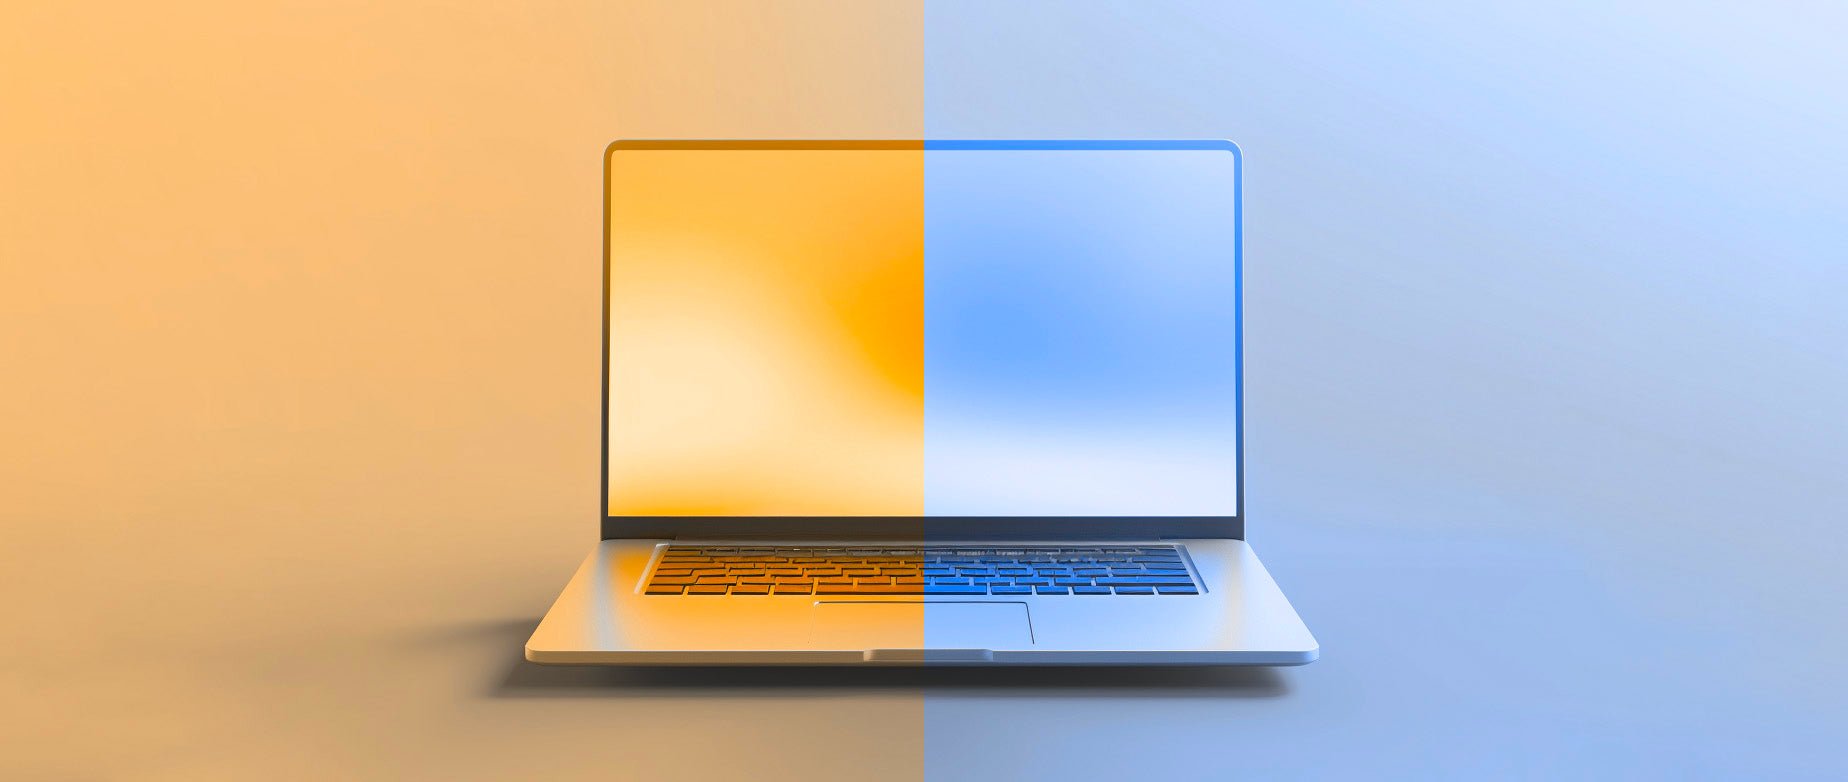 an image of a laptop with half the picture a light blue color and the other half a light orange: ui vs ux